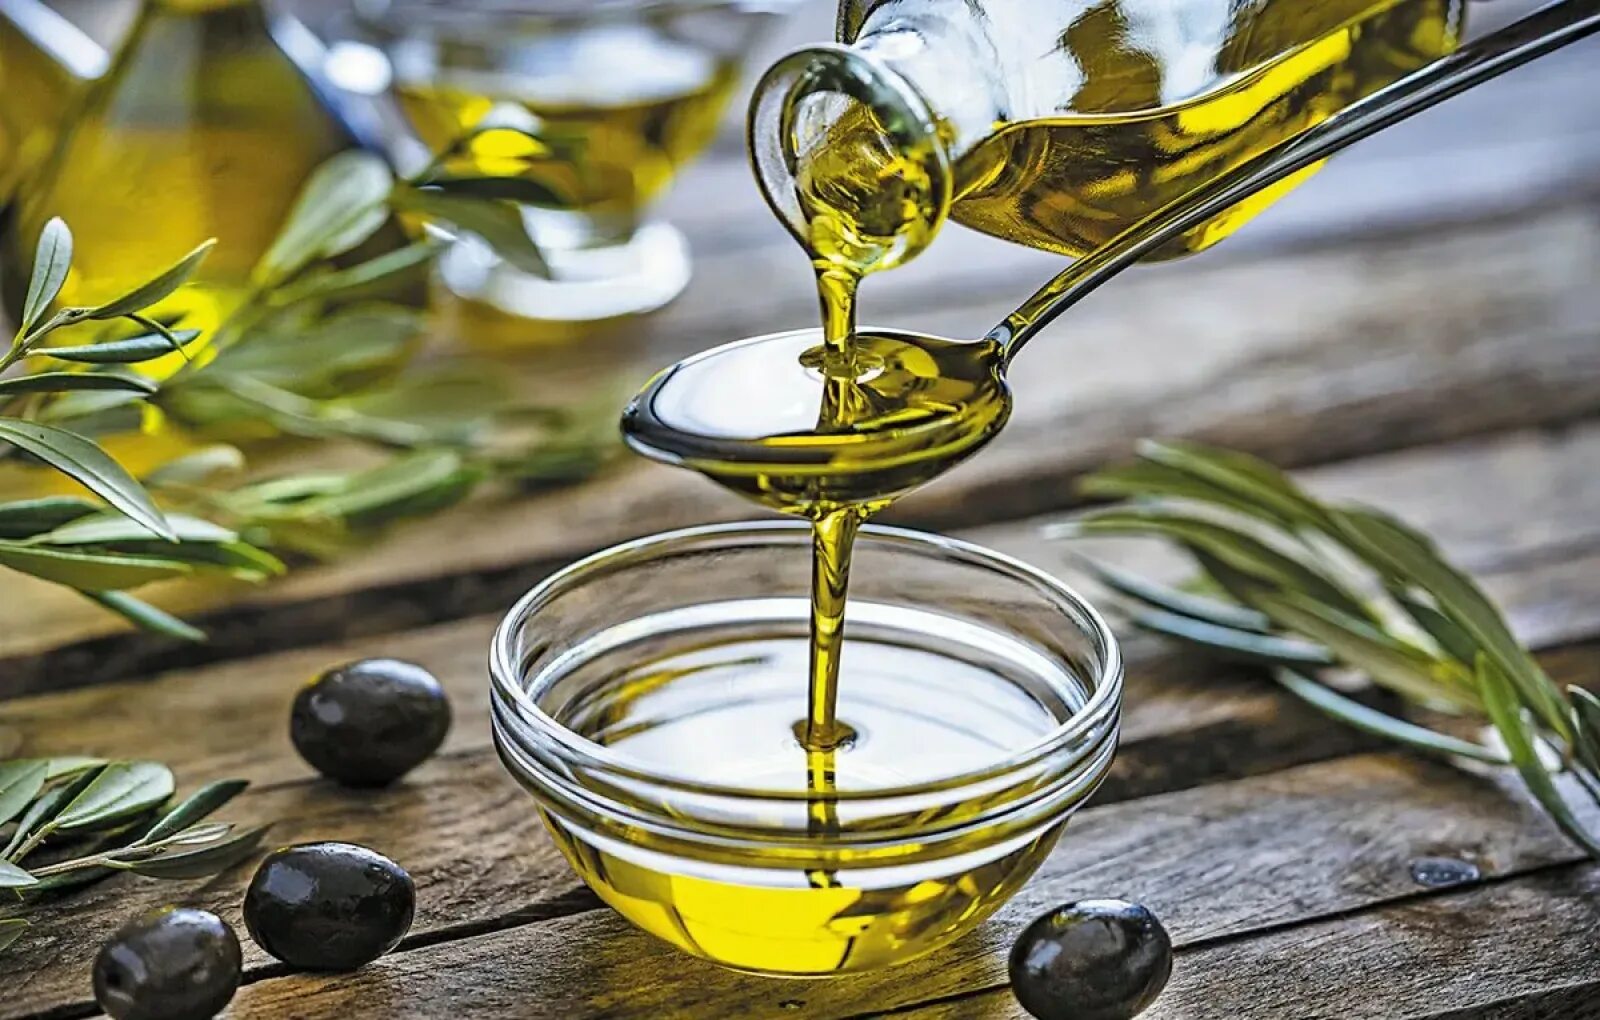 Olive Oil масло оливковое. Олив Ойл масло оливковое. Масло с оливковым маслом. Оливки и оливковое масло. Вещество оливковое масло